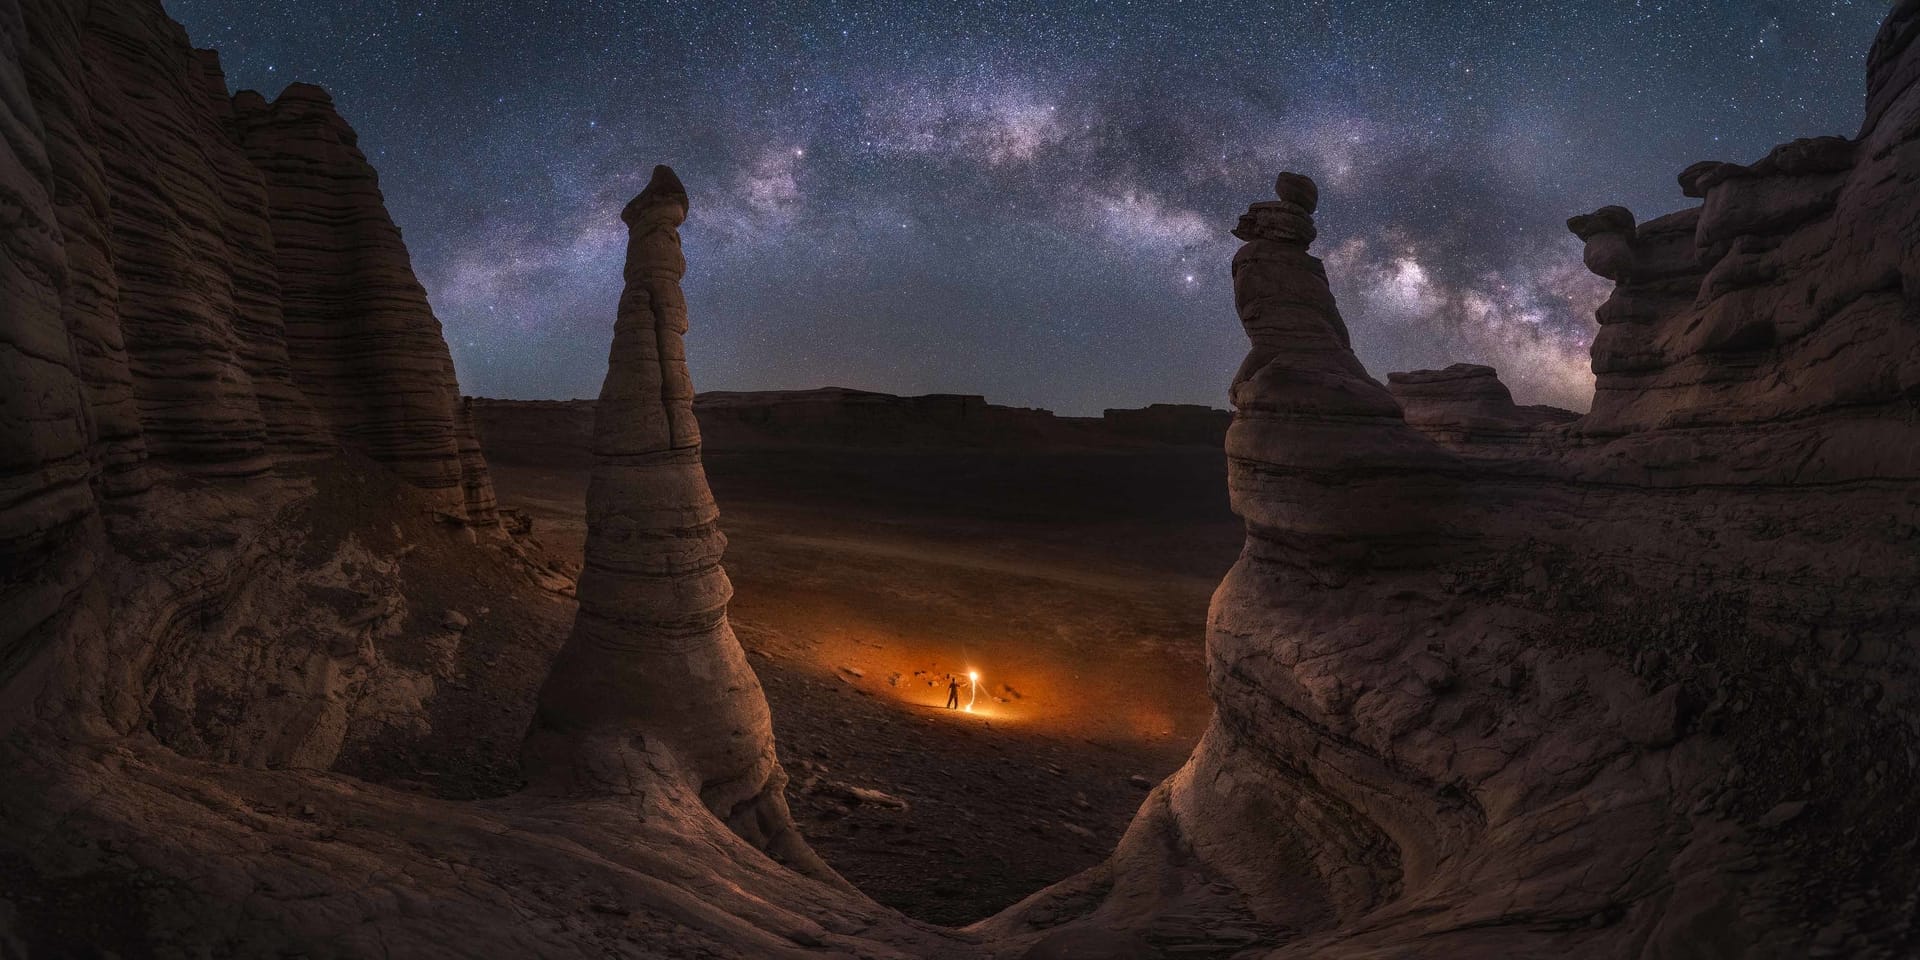 Milky Way photographer of the year Desierto China